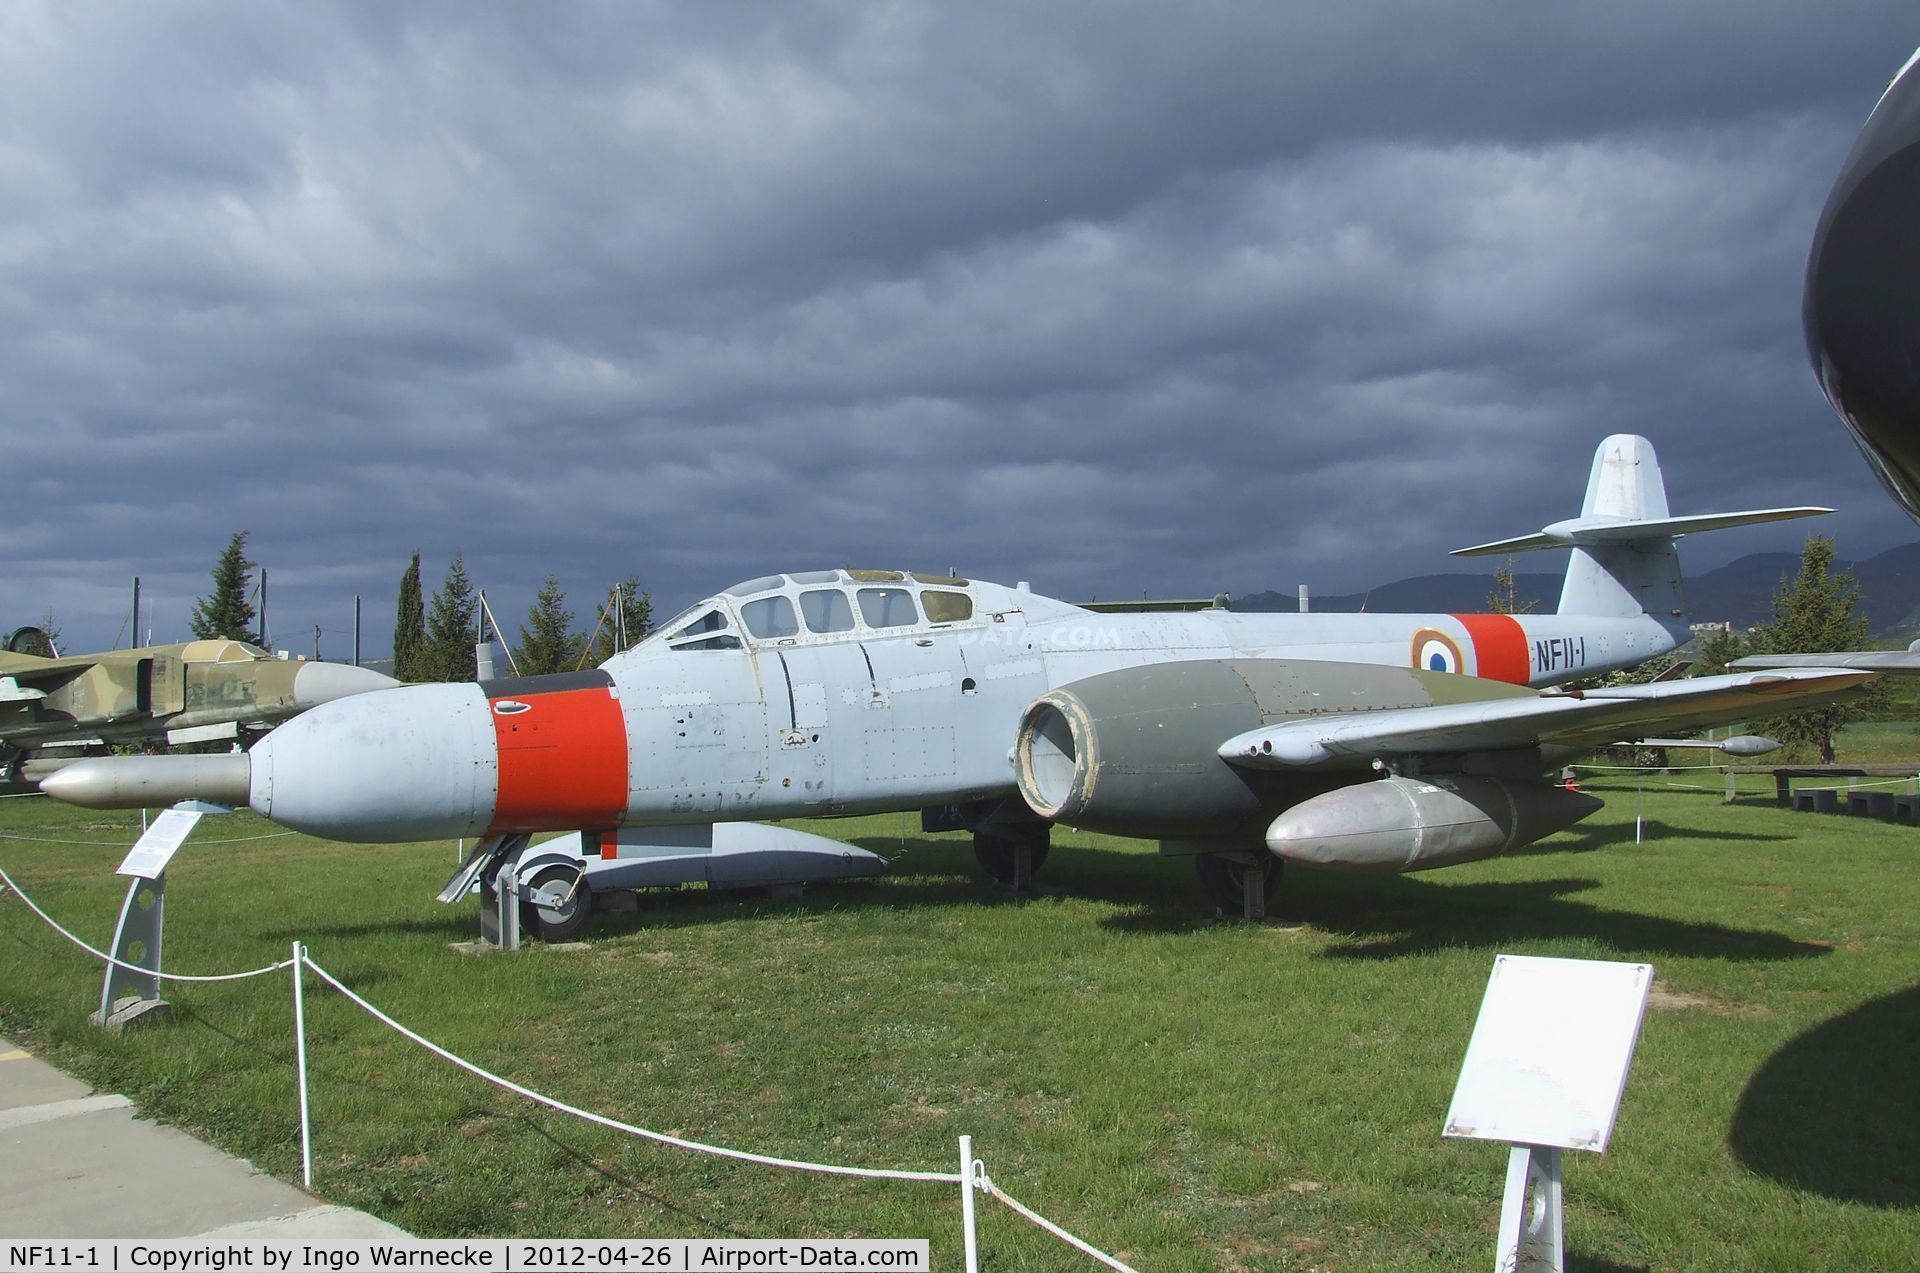 NF11-1, Gloster Meteor NF.11 C/N Not found NF11-1, Gloster Meteor NF11 at the Musée Européen de l'Aviation de Chasse, Montelimar Ancone airfield